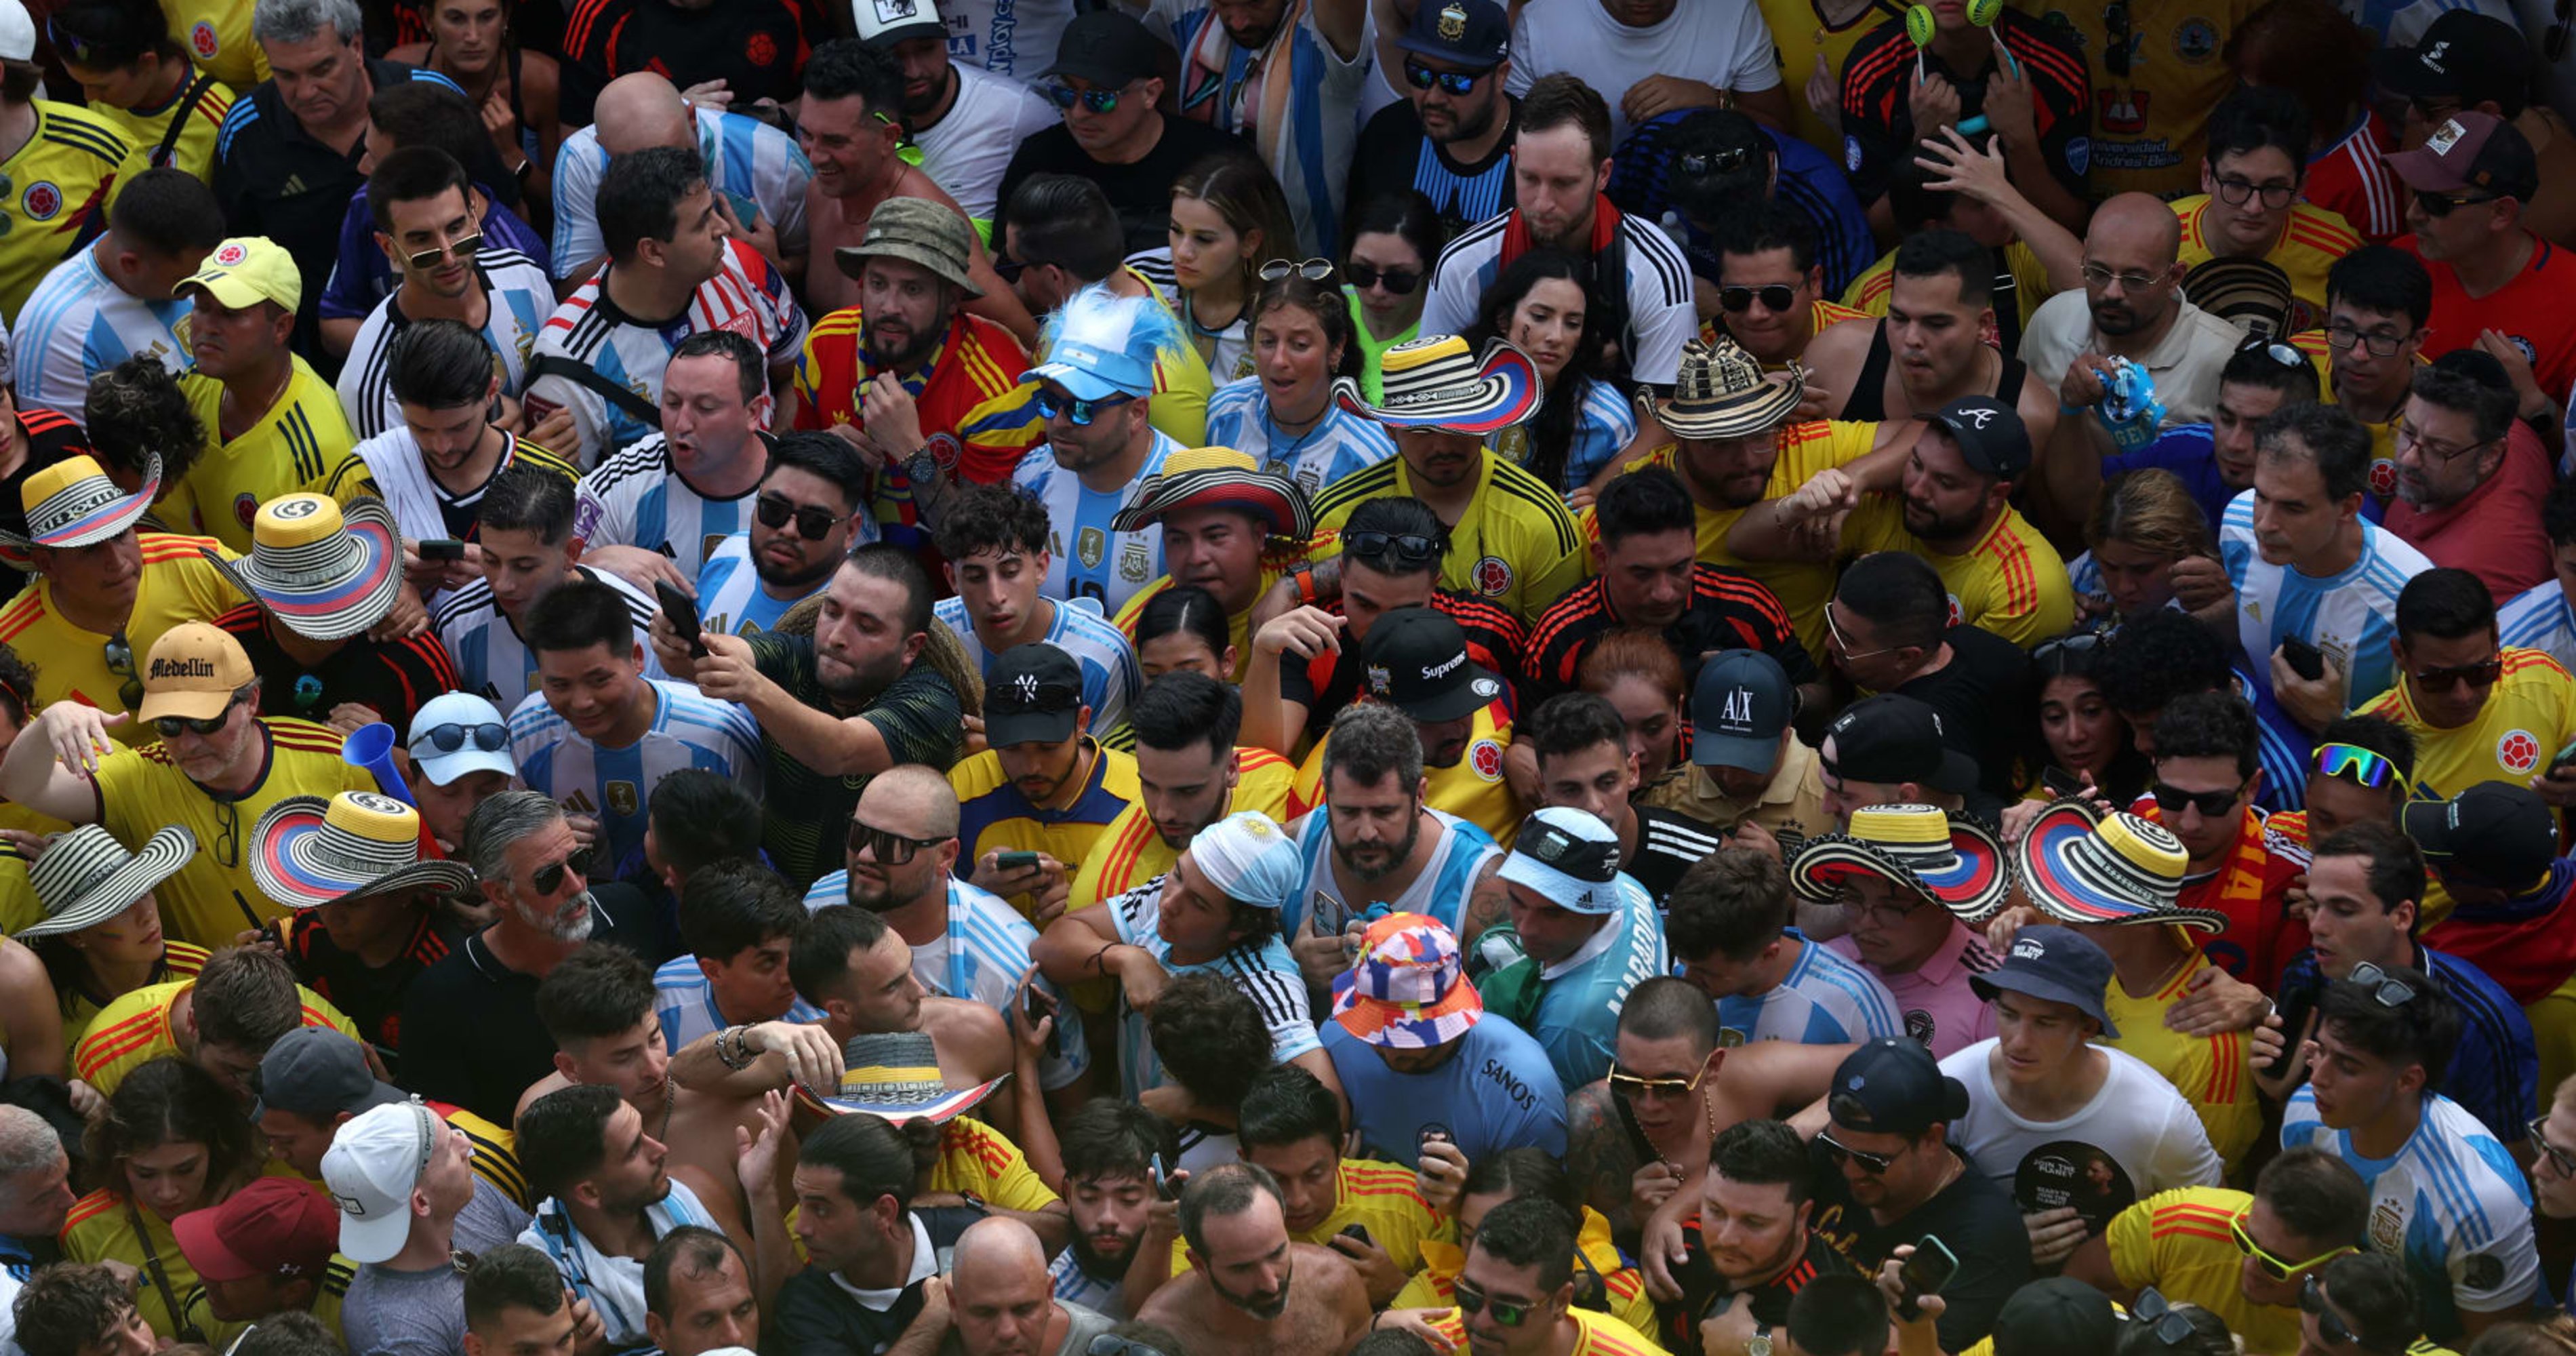 Copa America Final Delayed as Viral Videos Show Fans Rushing Entrance Gates